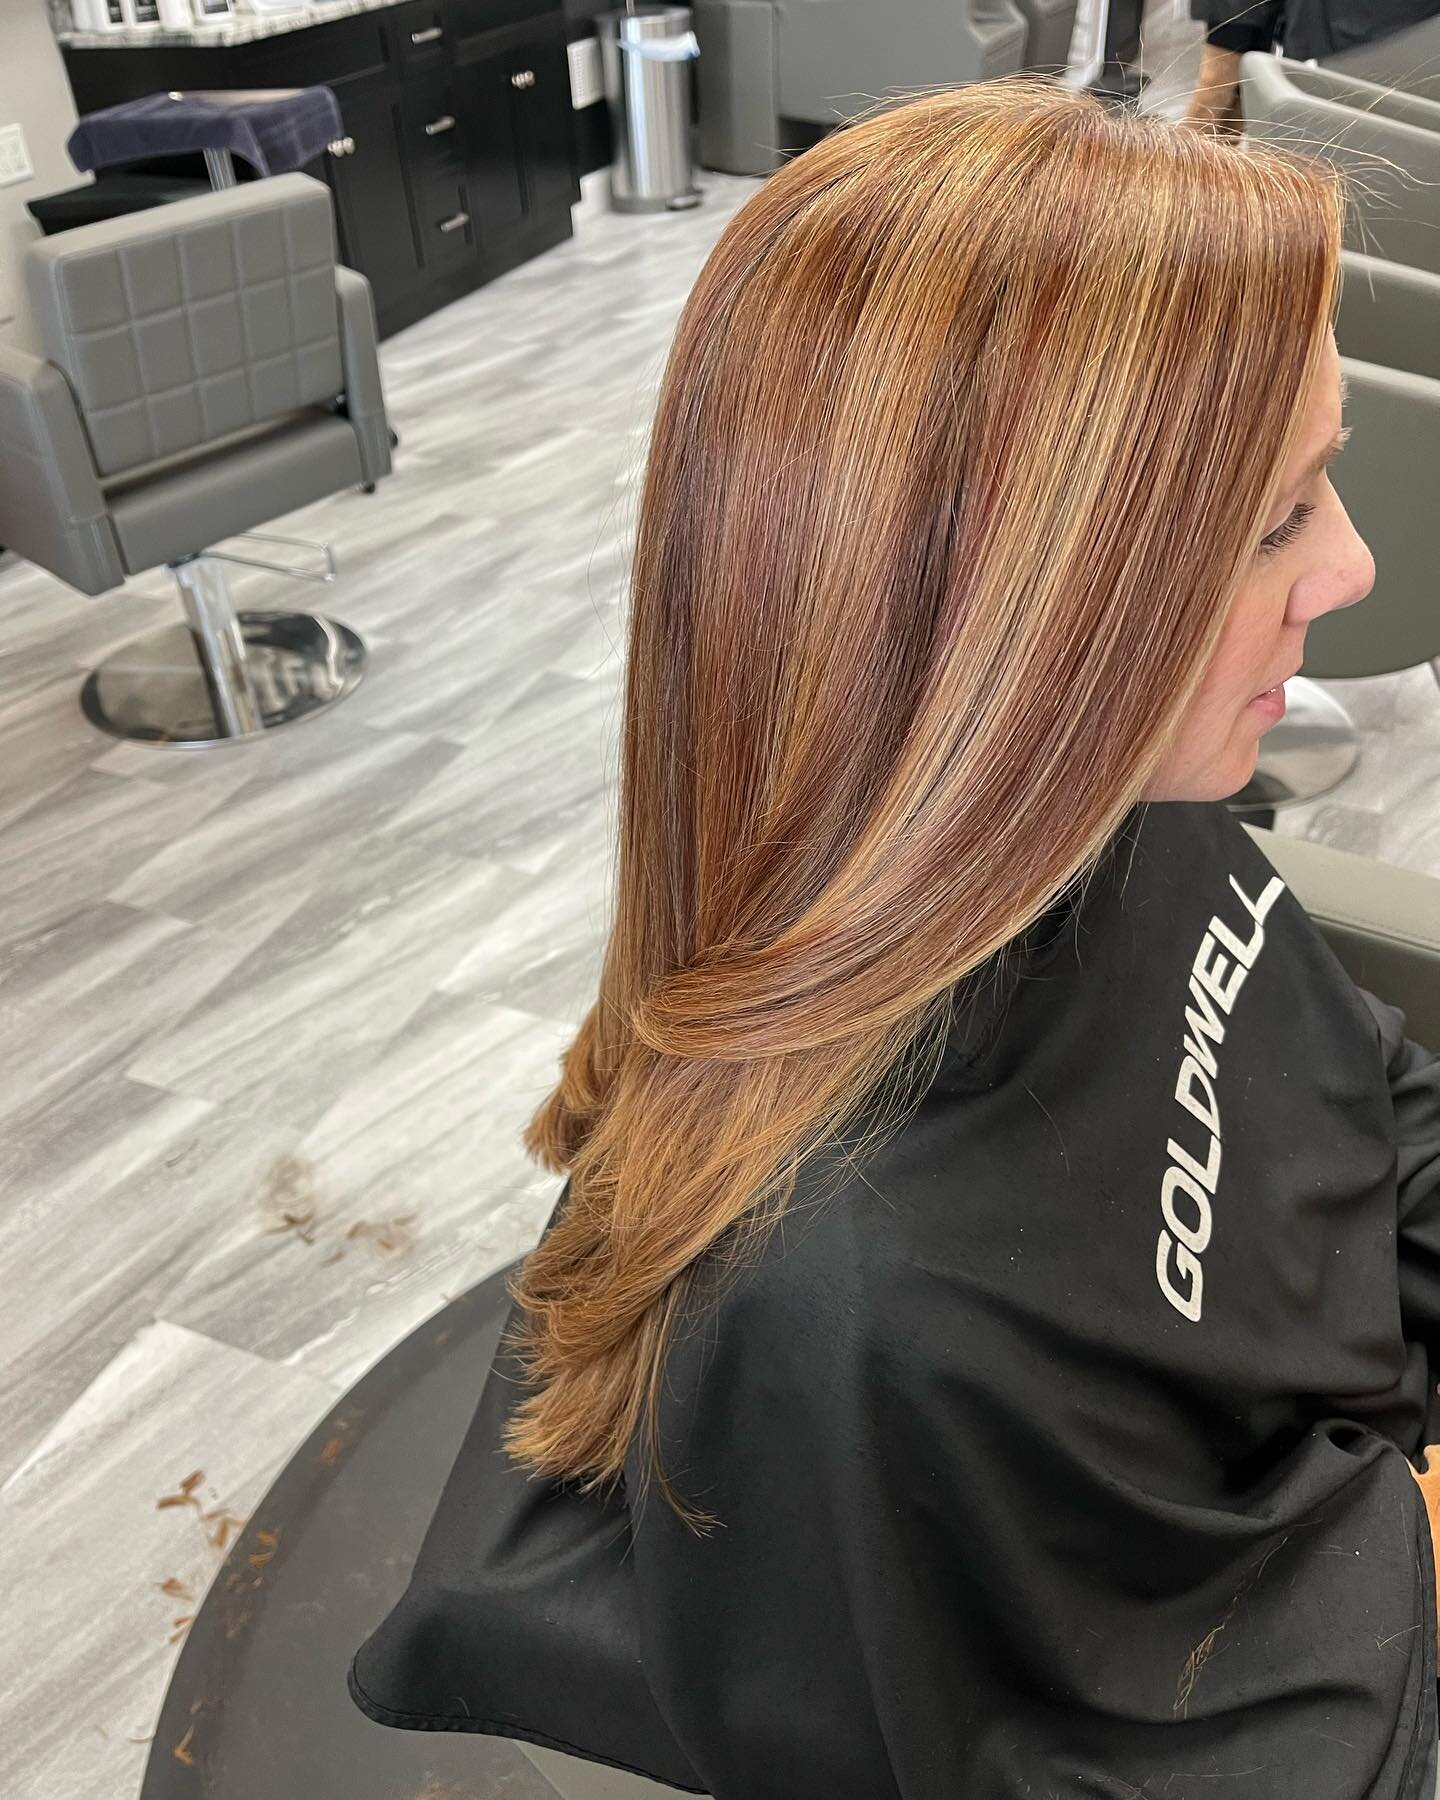 Loveee these fall copper tones with a natural blend ! 😍❤️#copperbalayage #goldwell #northshoresalons#wakefield